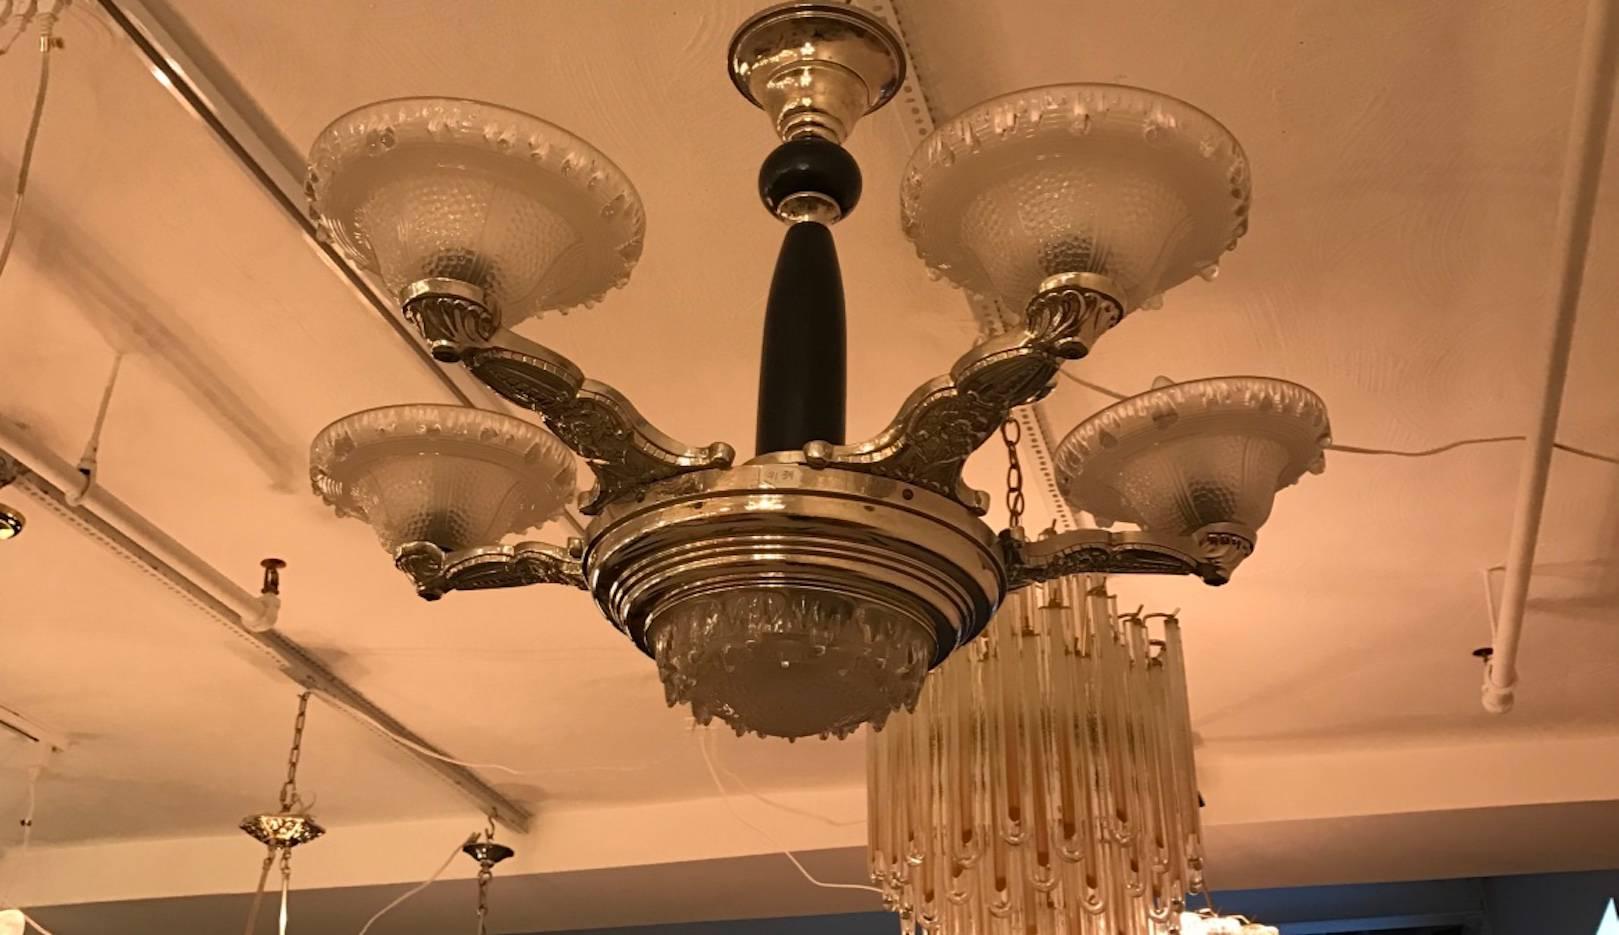 Stunning French Art Deco chandelier with five opalescent glass shades and opalescent centre bowl. The nickel bronze frame has a floral motif with an ebony wood shaft. Beautiful deco details.
 